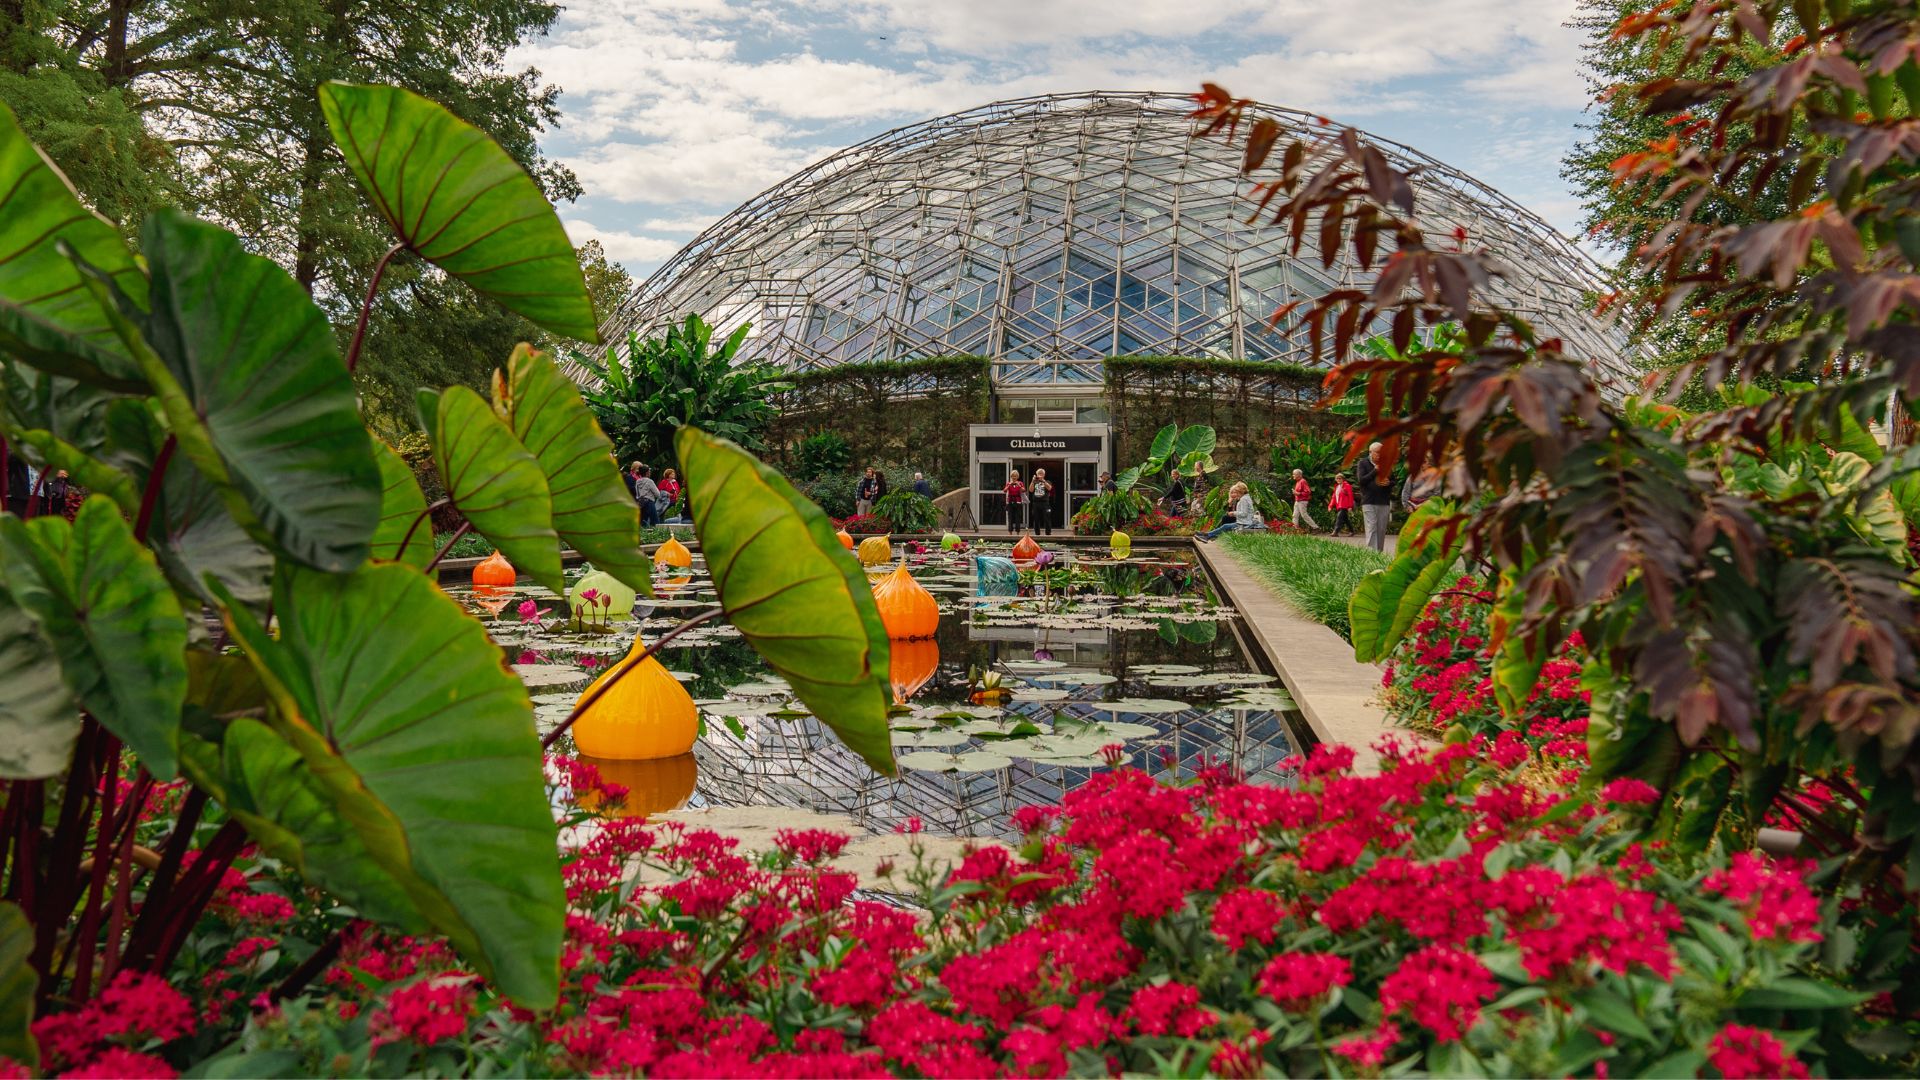 The Missouri Botanical Garden is an important part of St. Louis arts and culture.